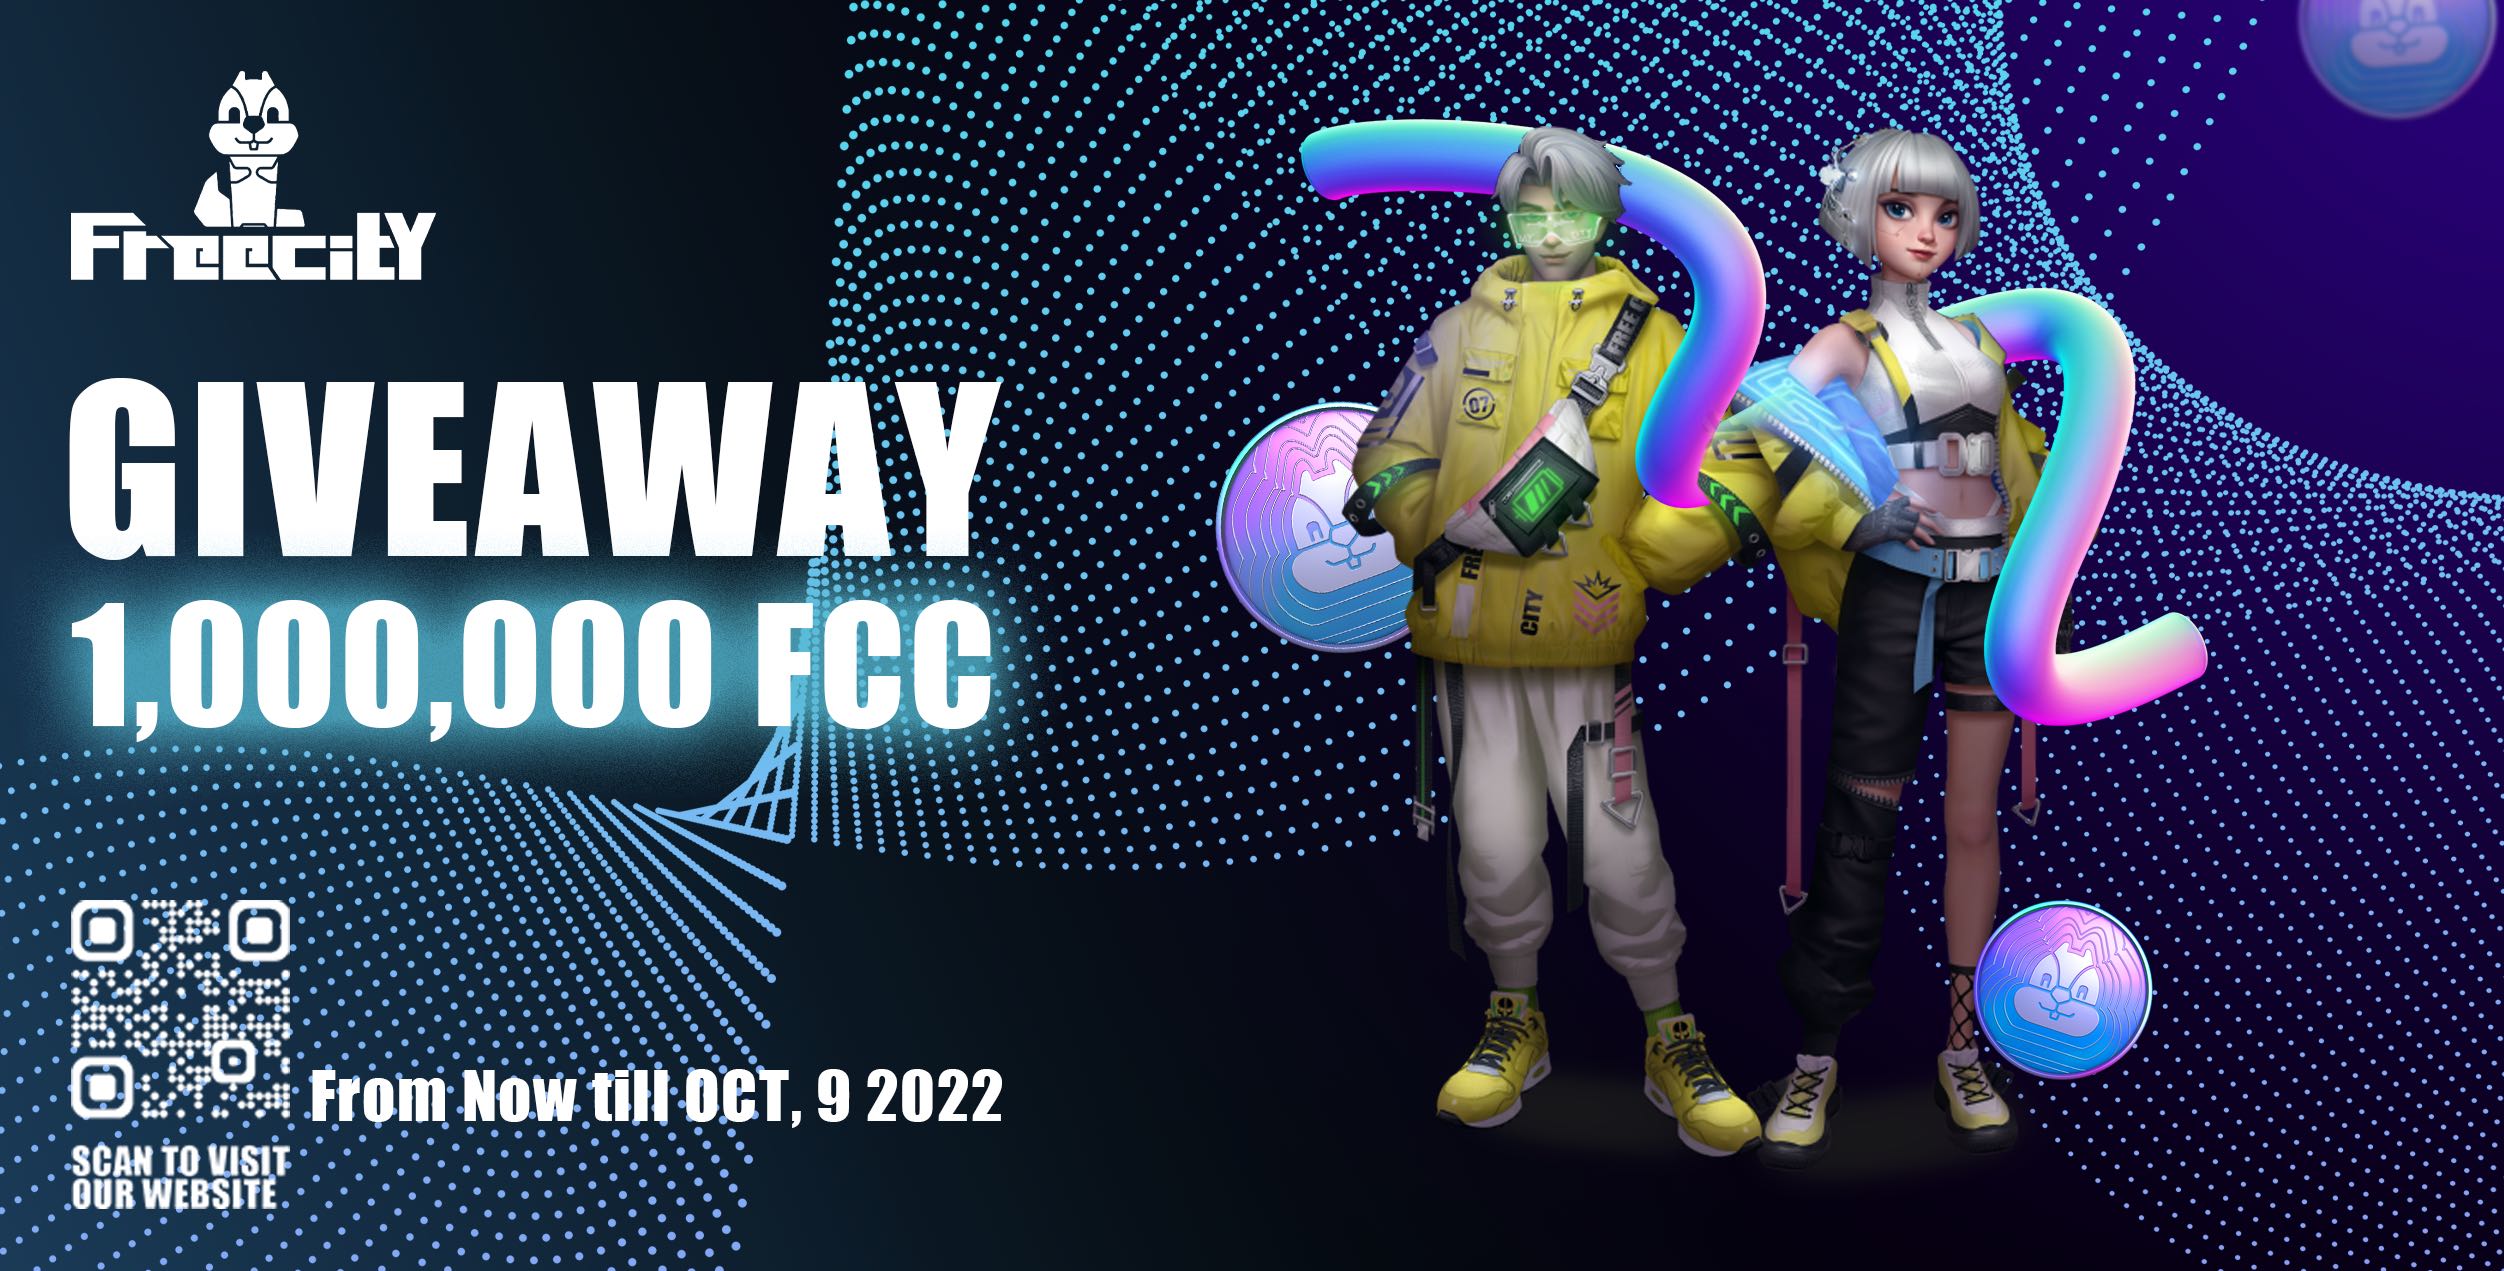 FREE FCC Coins In FreeCity Crypto Airdrop!